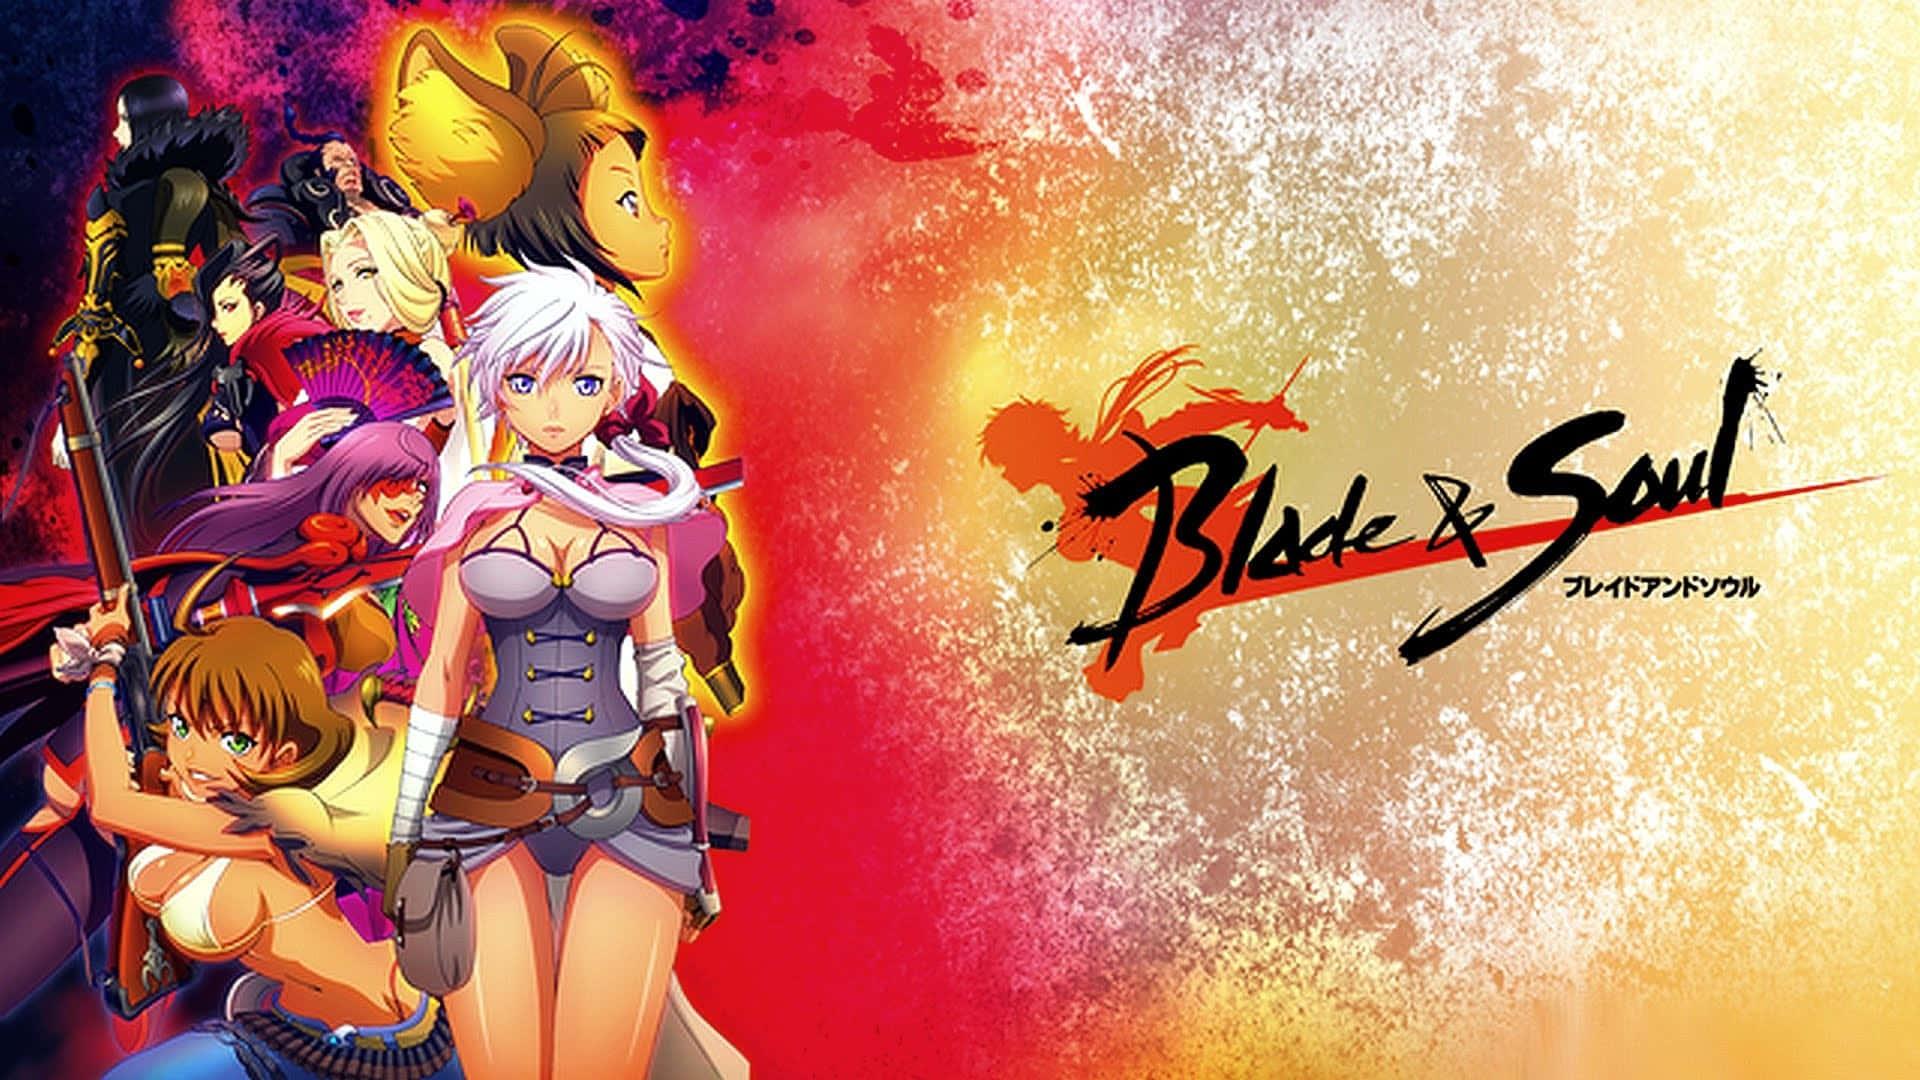 "Journey into the world of Blade and Soul!" Wallpaper